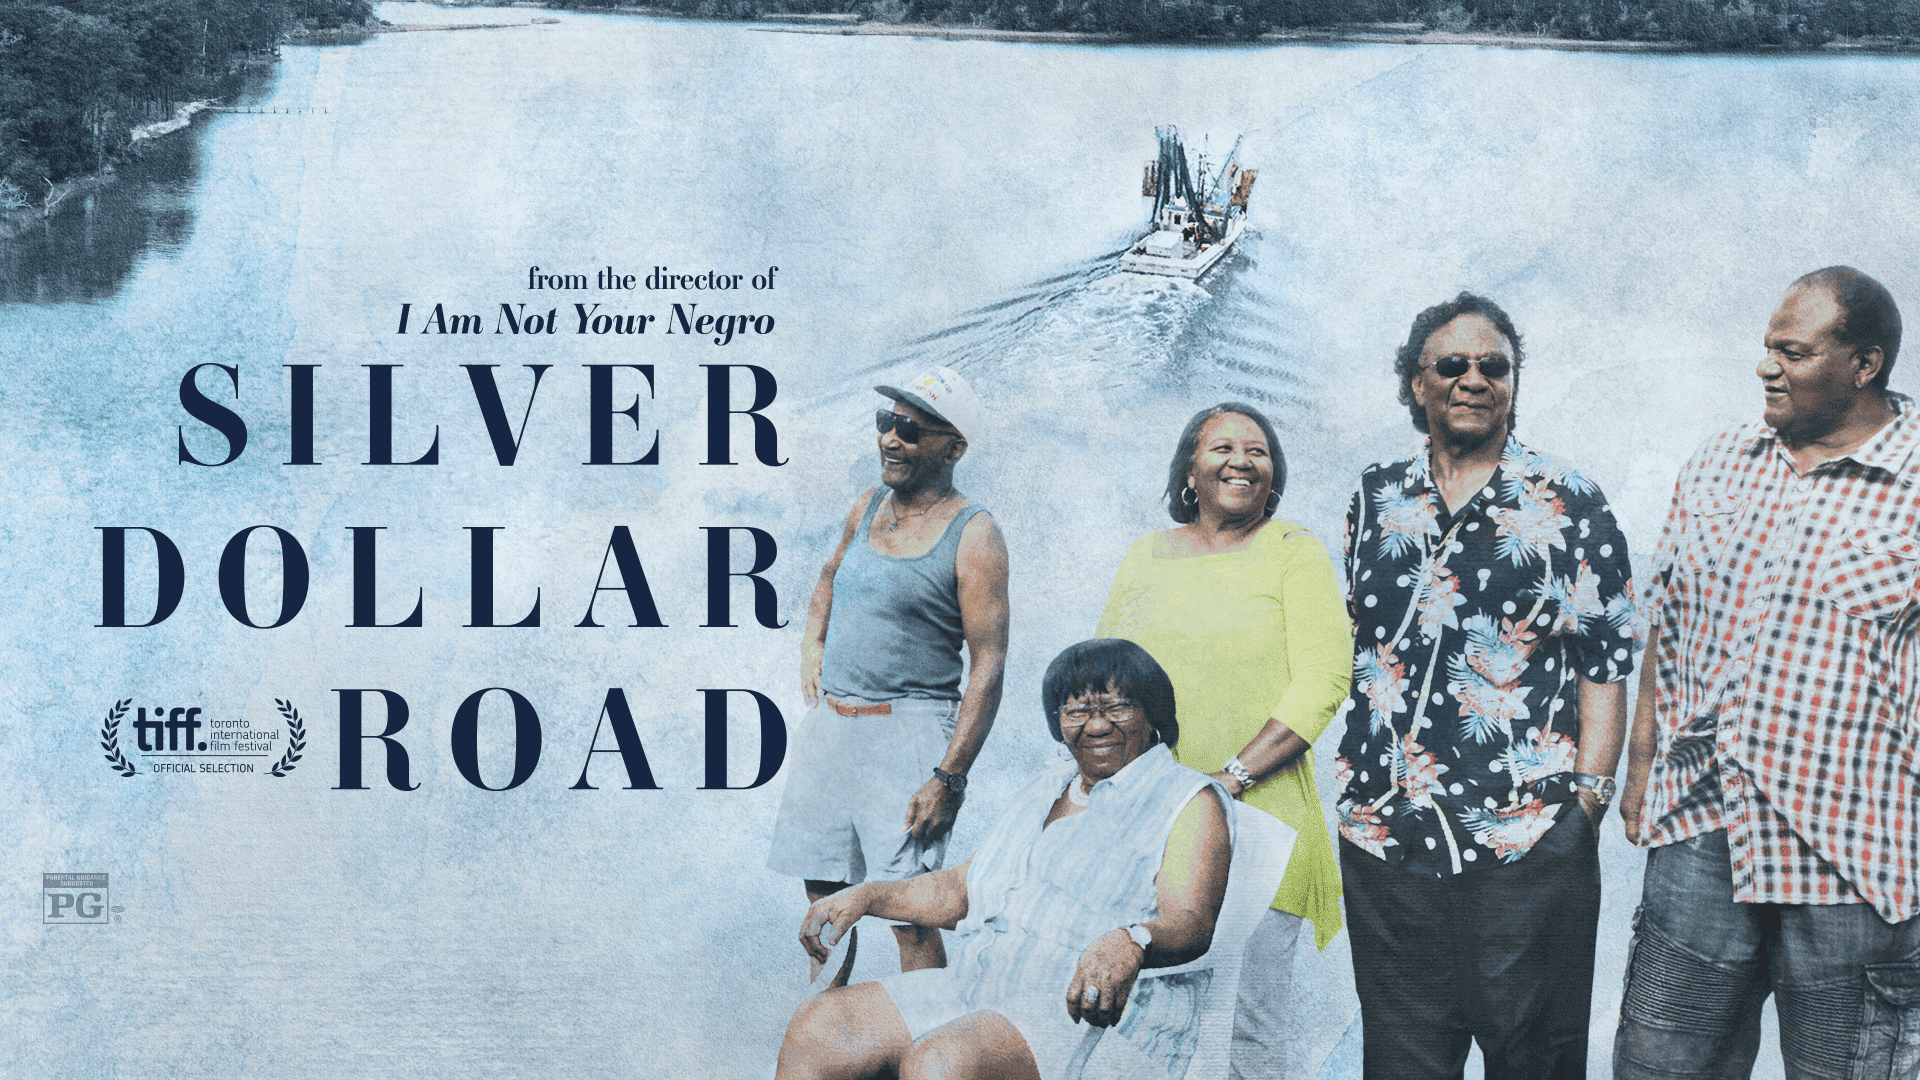 People pose for a film poster of SILVER DOLLAR ROAD film.